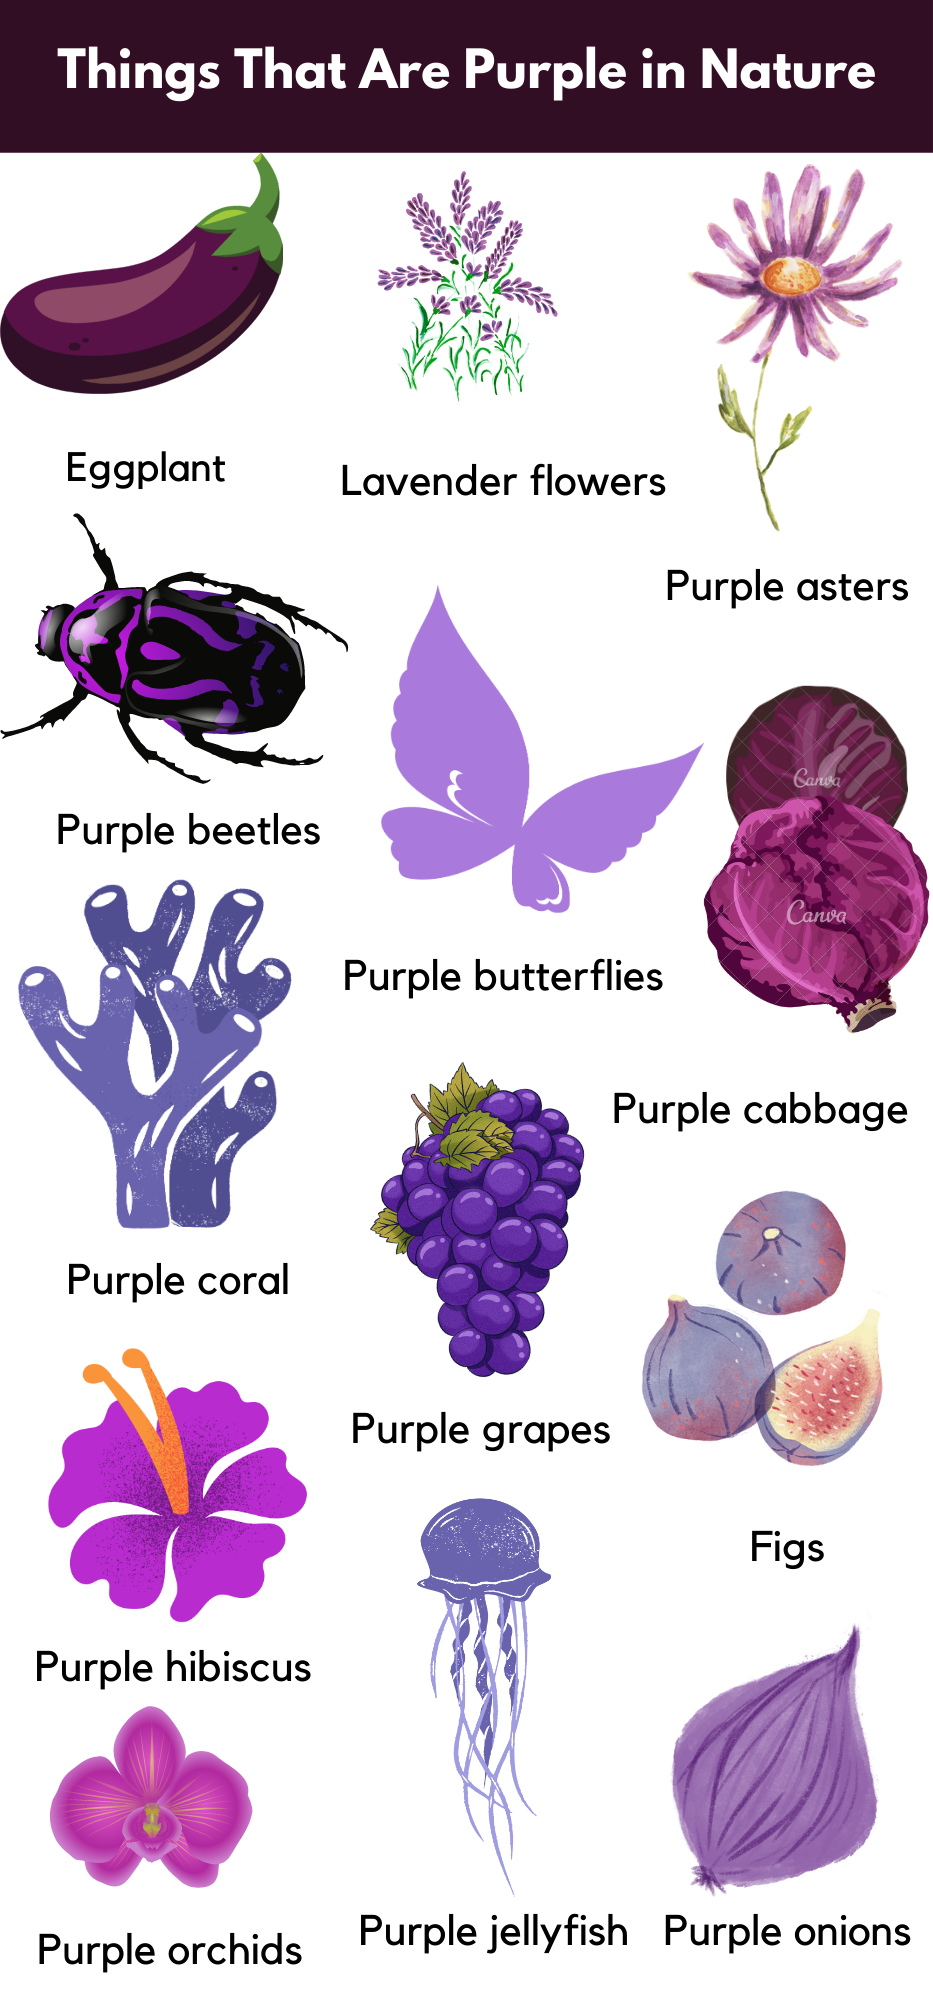 Things That Are Purple  Naturally Purple Things - GrammarVocab